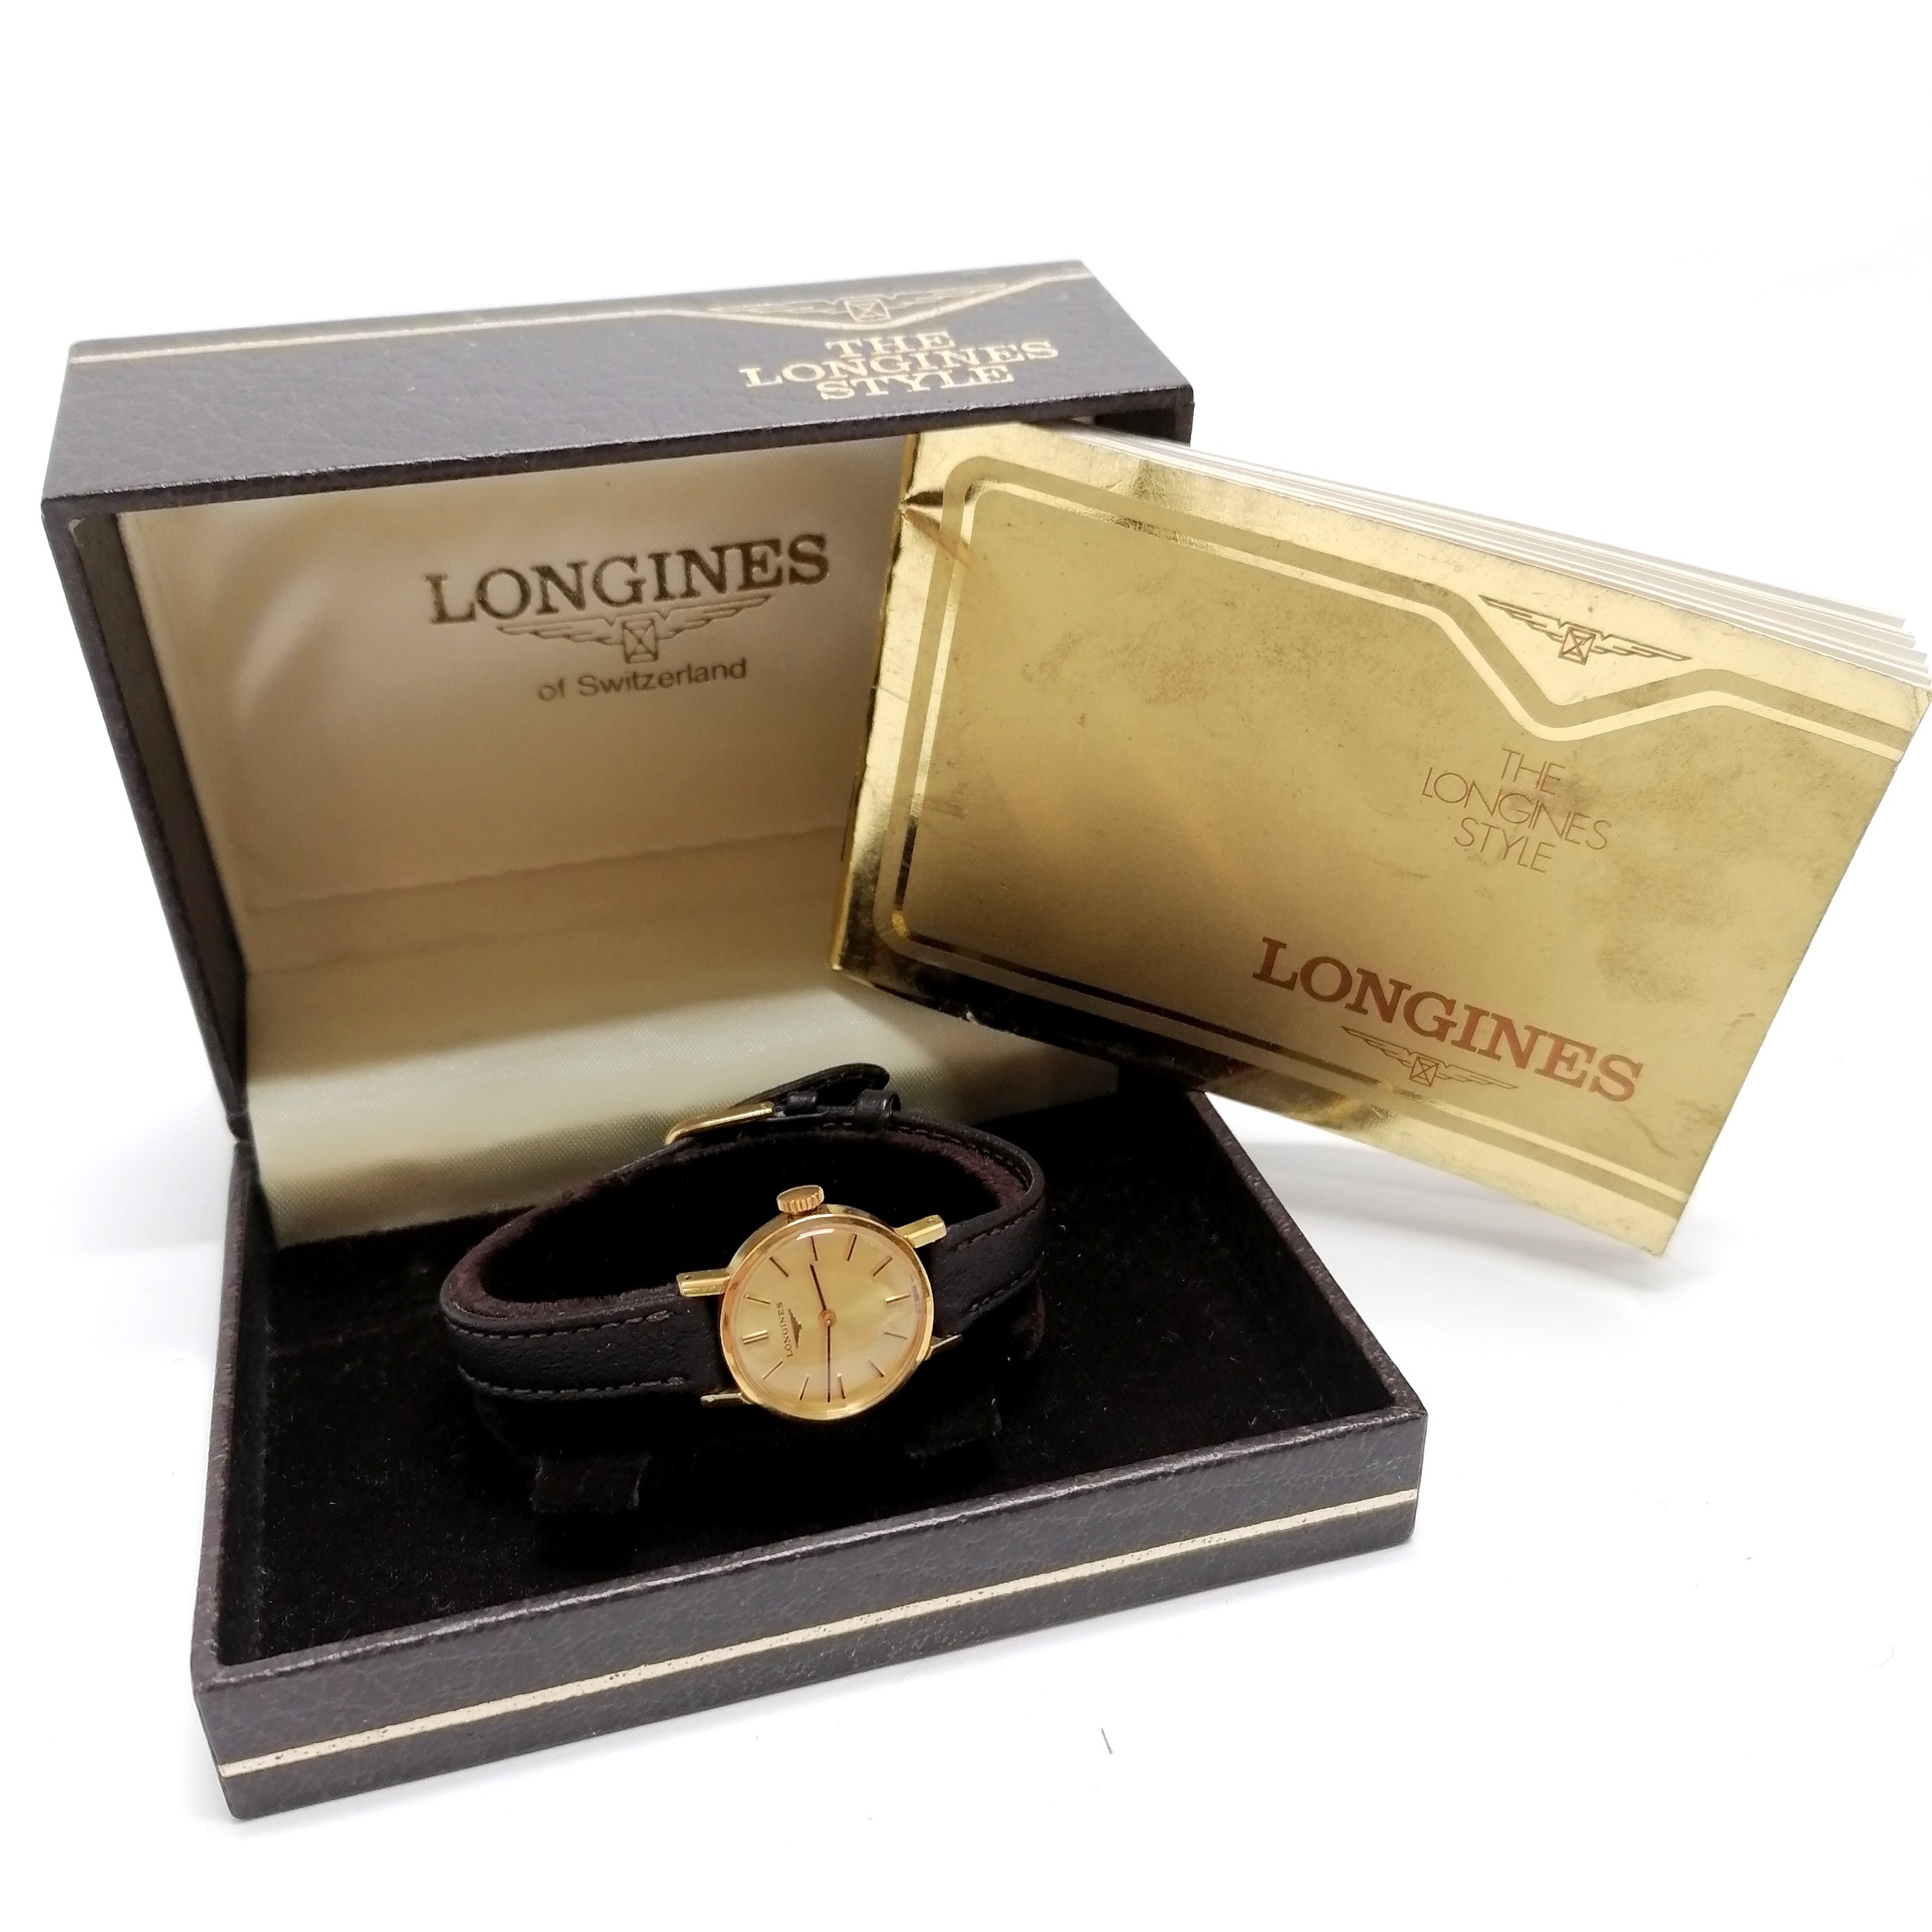 Ladies Longines manual wind wristwatch (20mm case) in original box with 1984 dated papers ~ for - Image 4 of 4